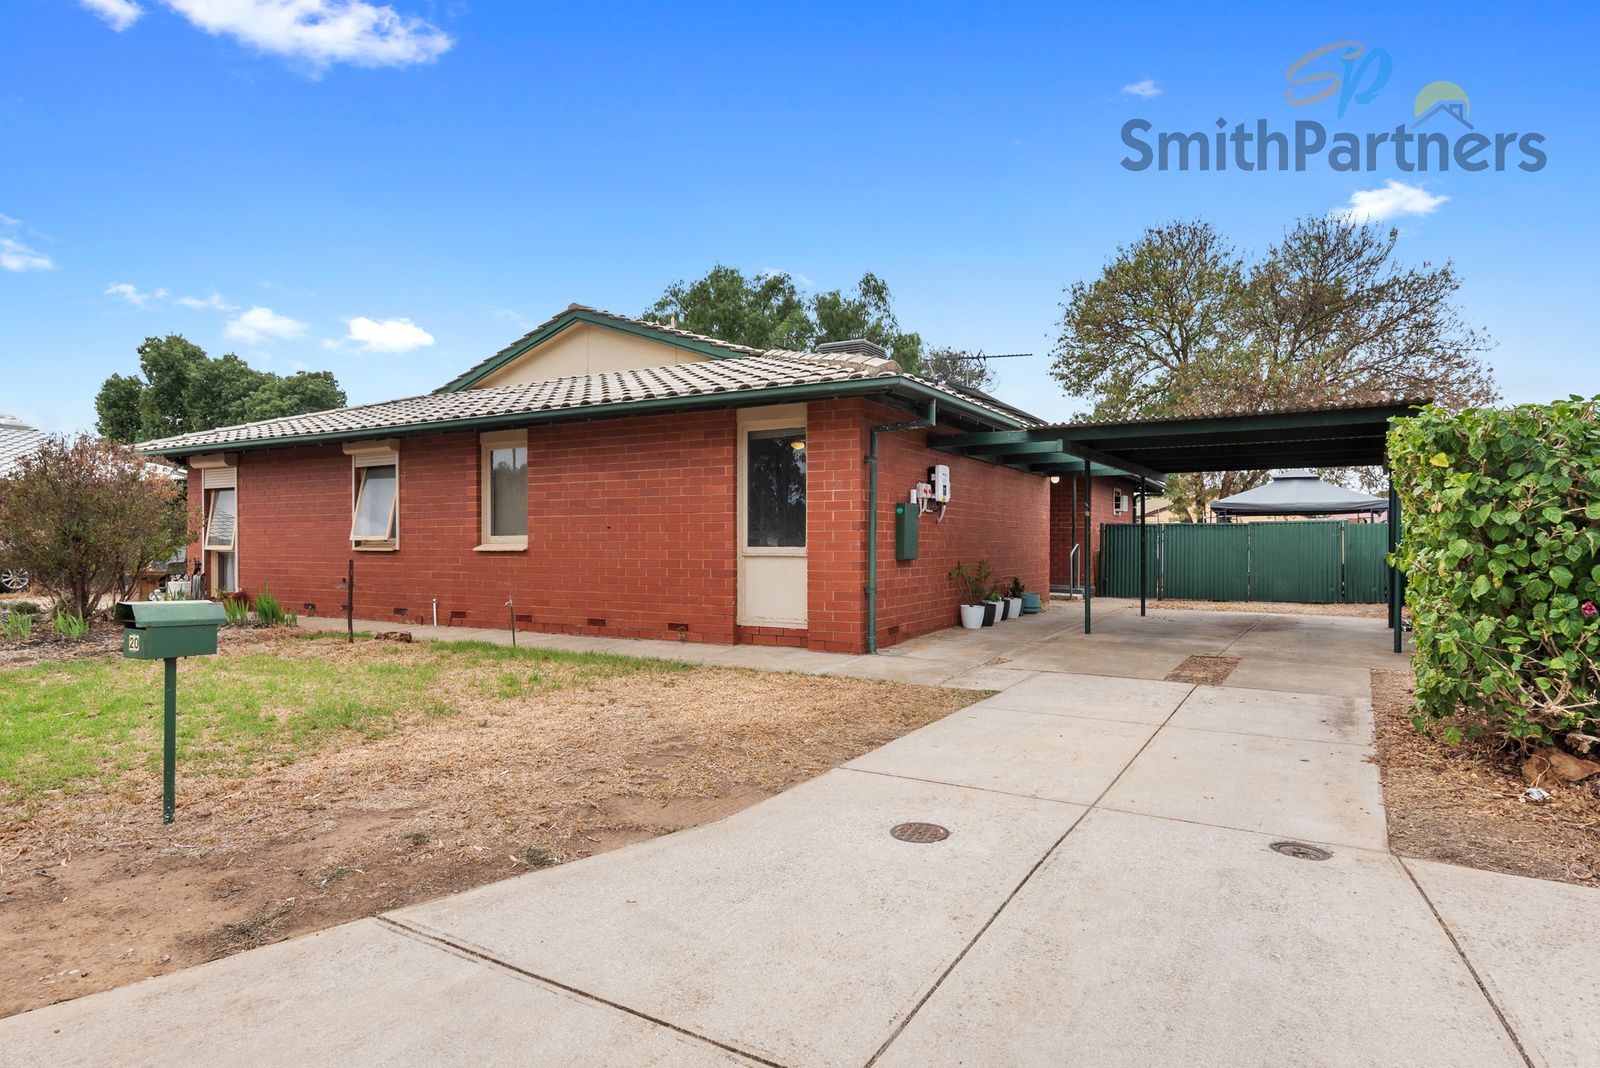 3 bedrooms Duplex in 20 Myall Street GAWLER WEST SA, 5118